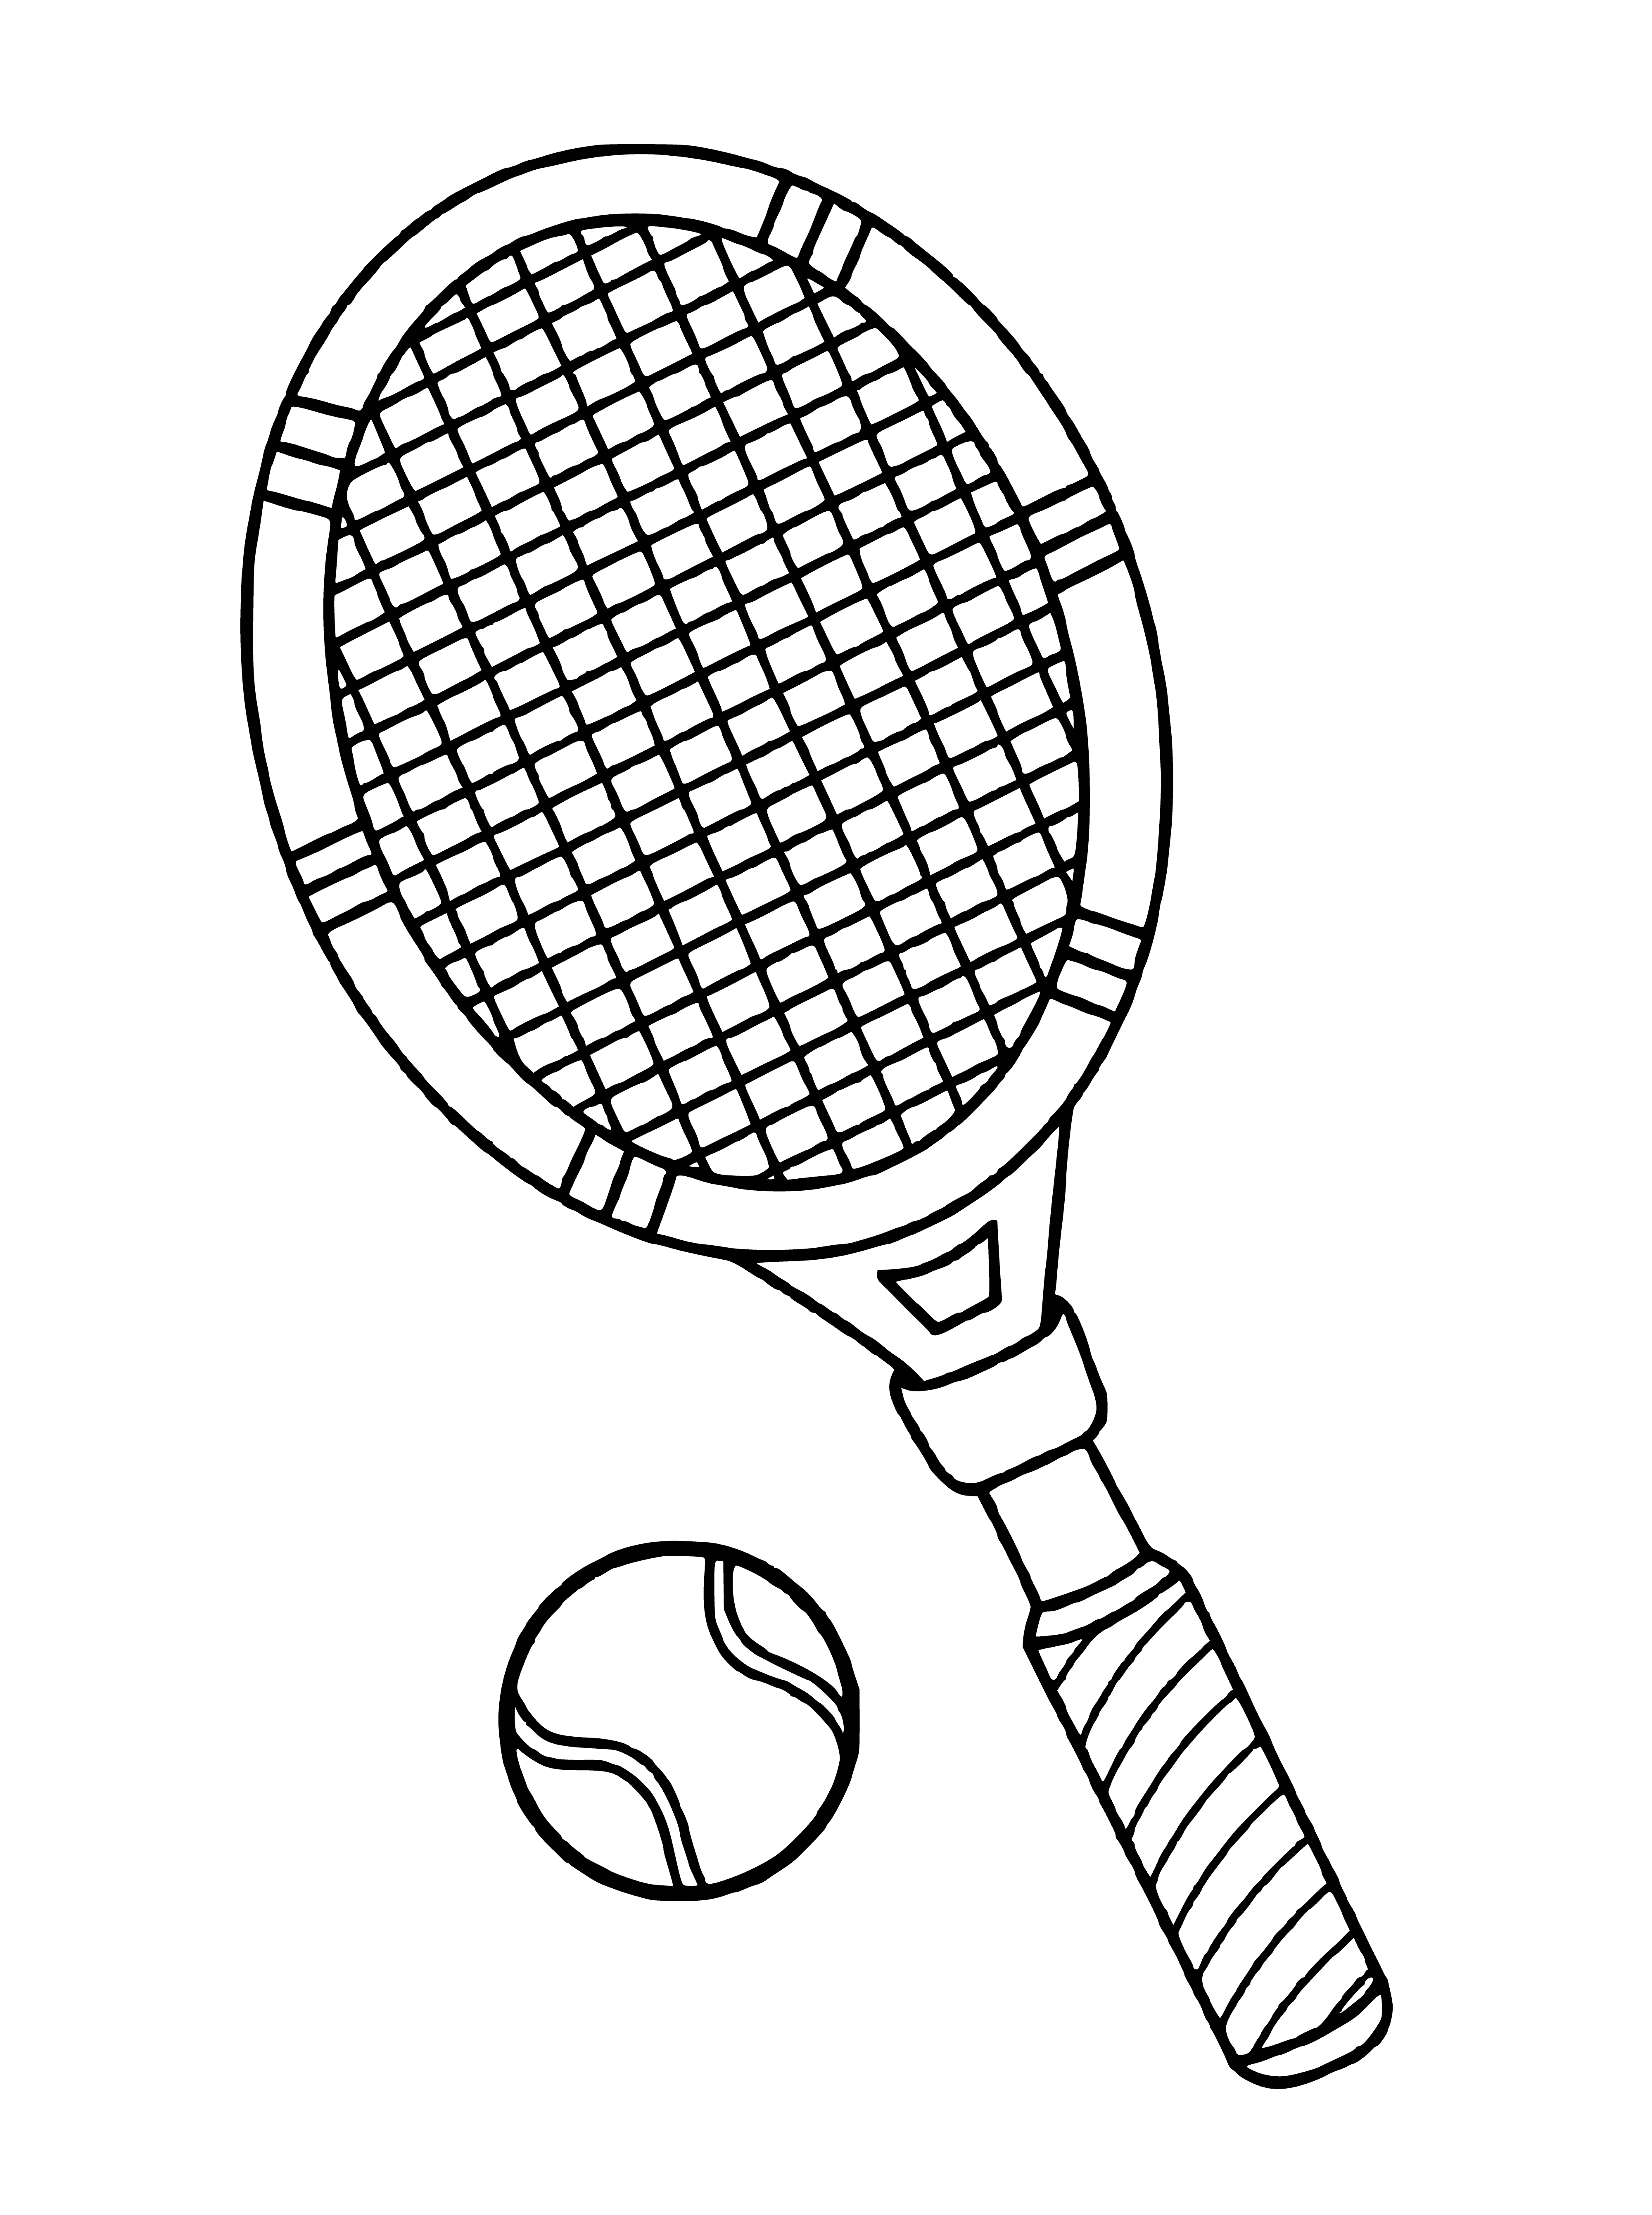 coloring page: A tennis racket and ball: Long racket with strings and round, green ball. #tennis #racket #ball